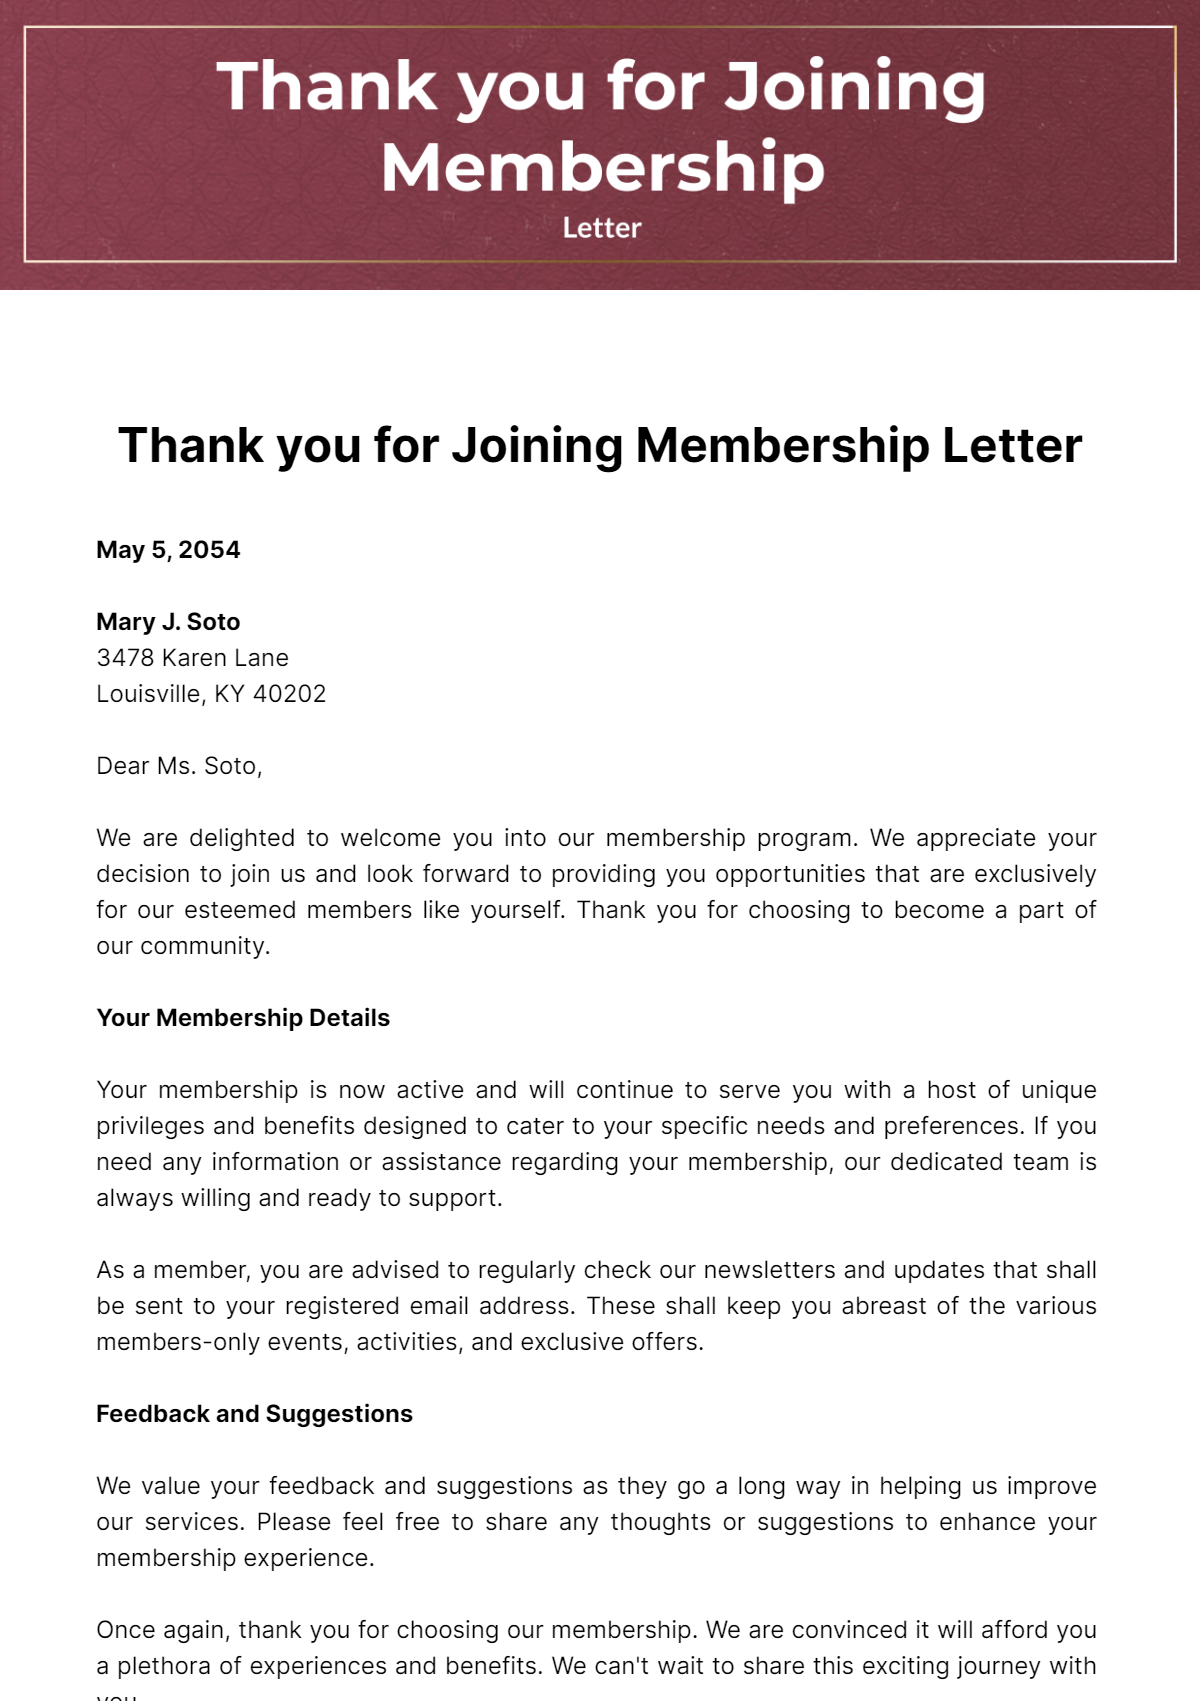 Free Thank you for Joining Membership Letter Template